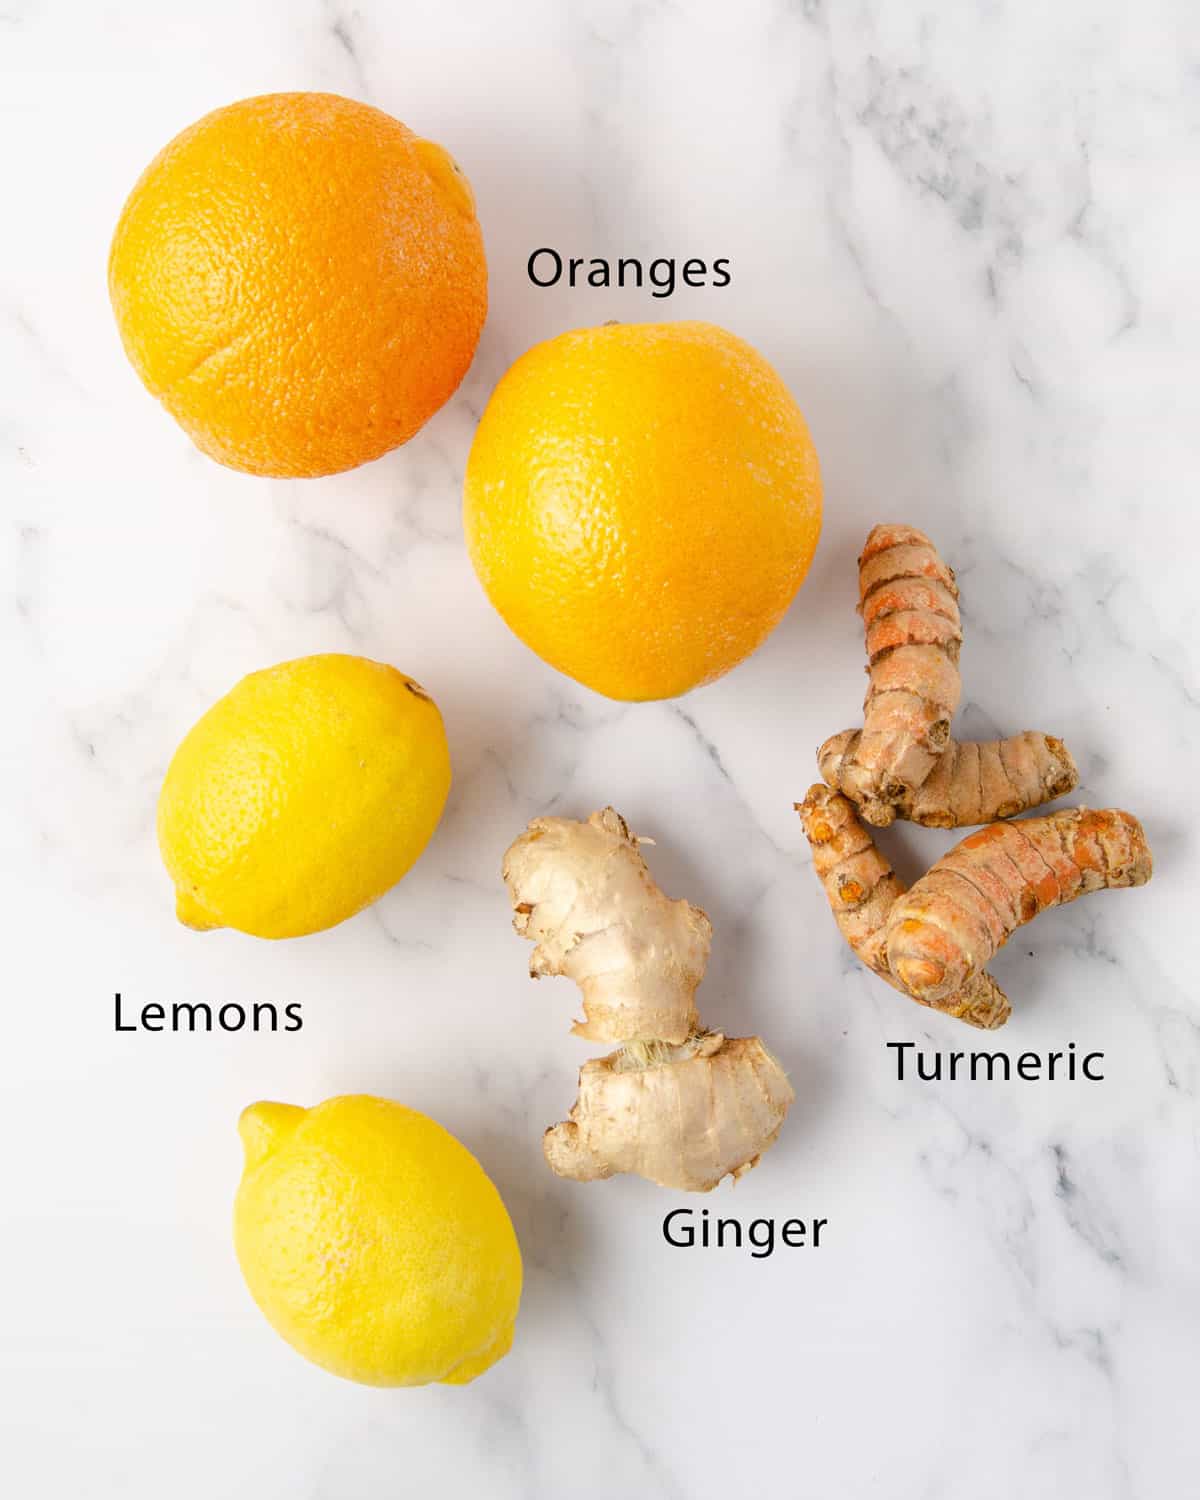 Two lemons, two oranges, 4 pieces of turmeric and two pieces of ginger on a marble countertop to represent the ingredients needed for a ginger turmeric shot.